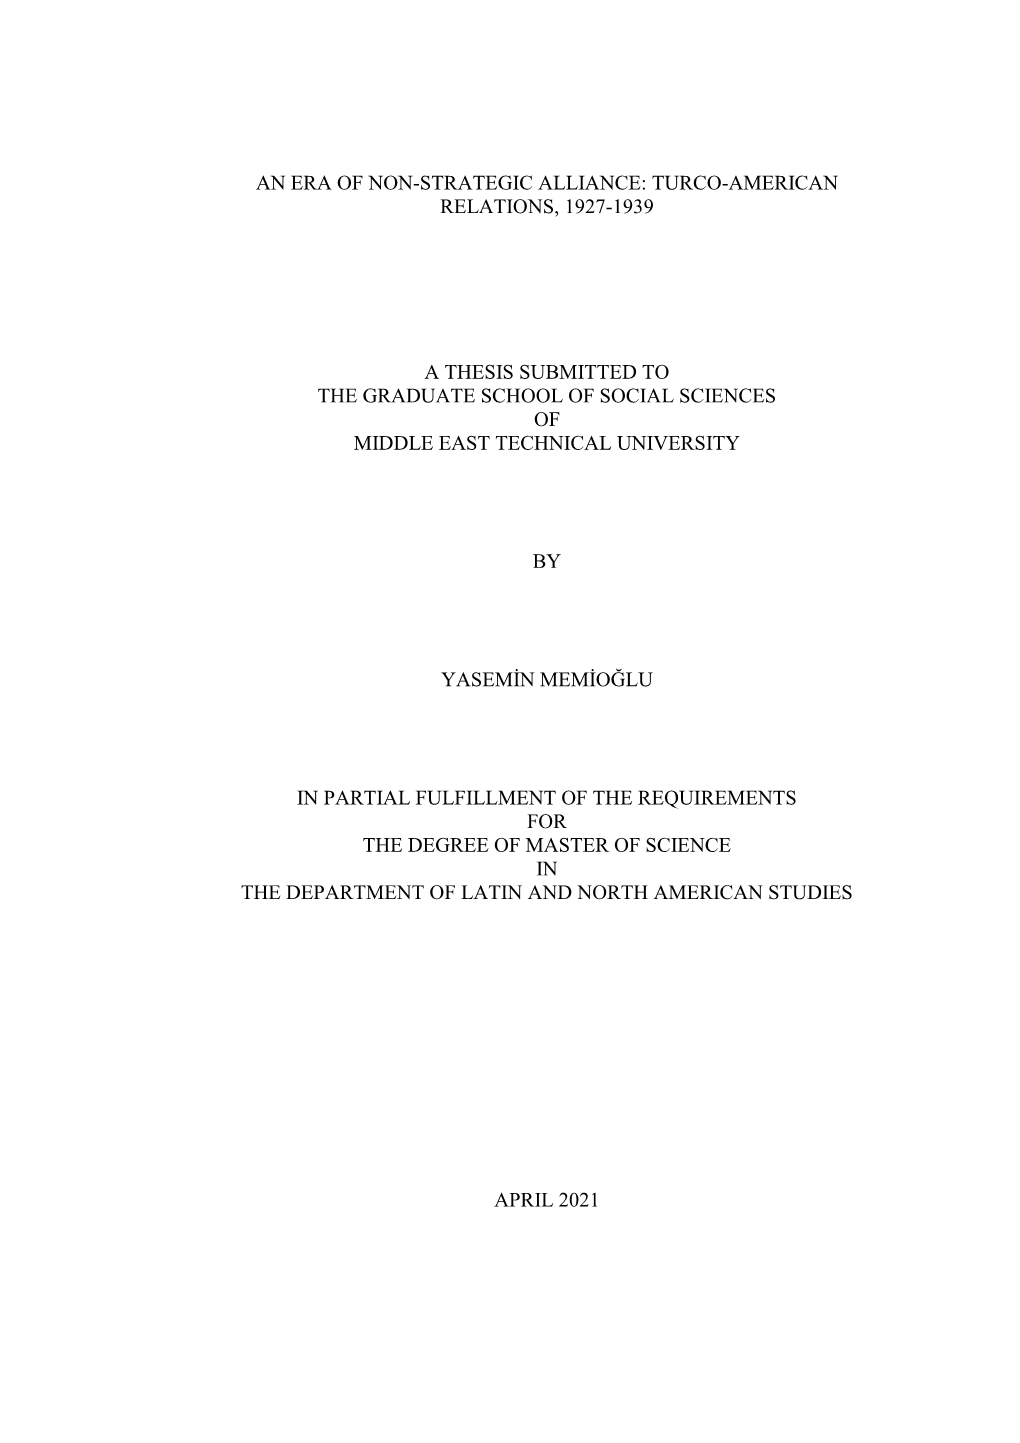 Turco-American Relations, 1927-1939 a Thesis Submitted